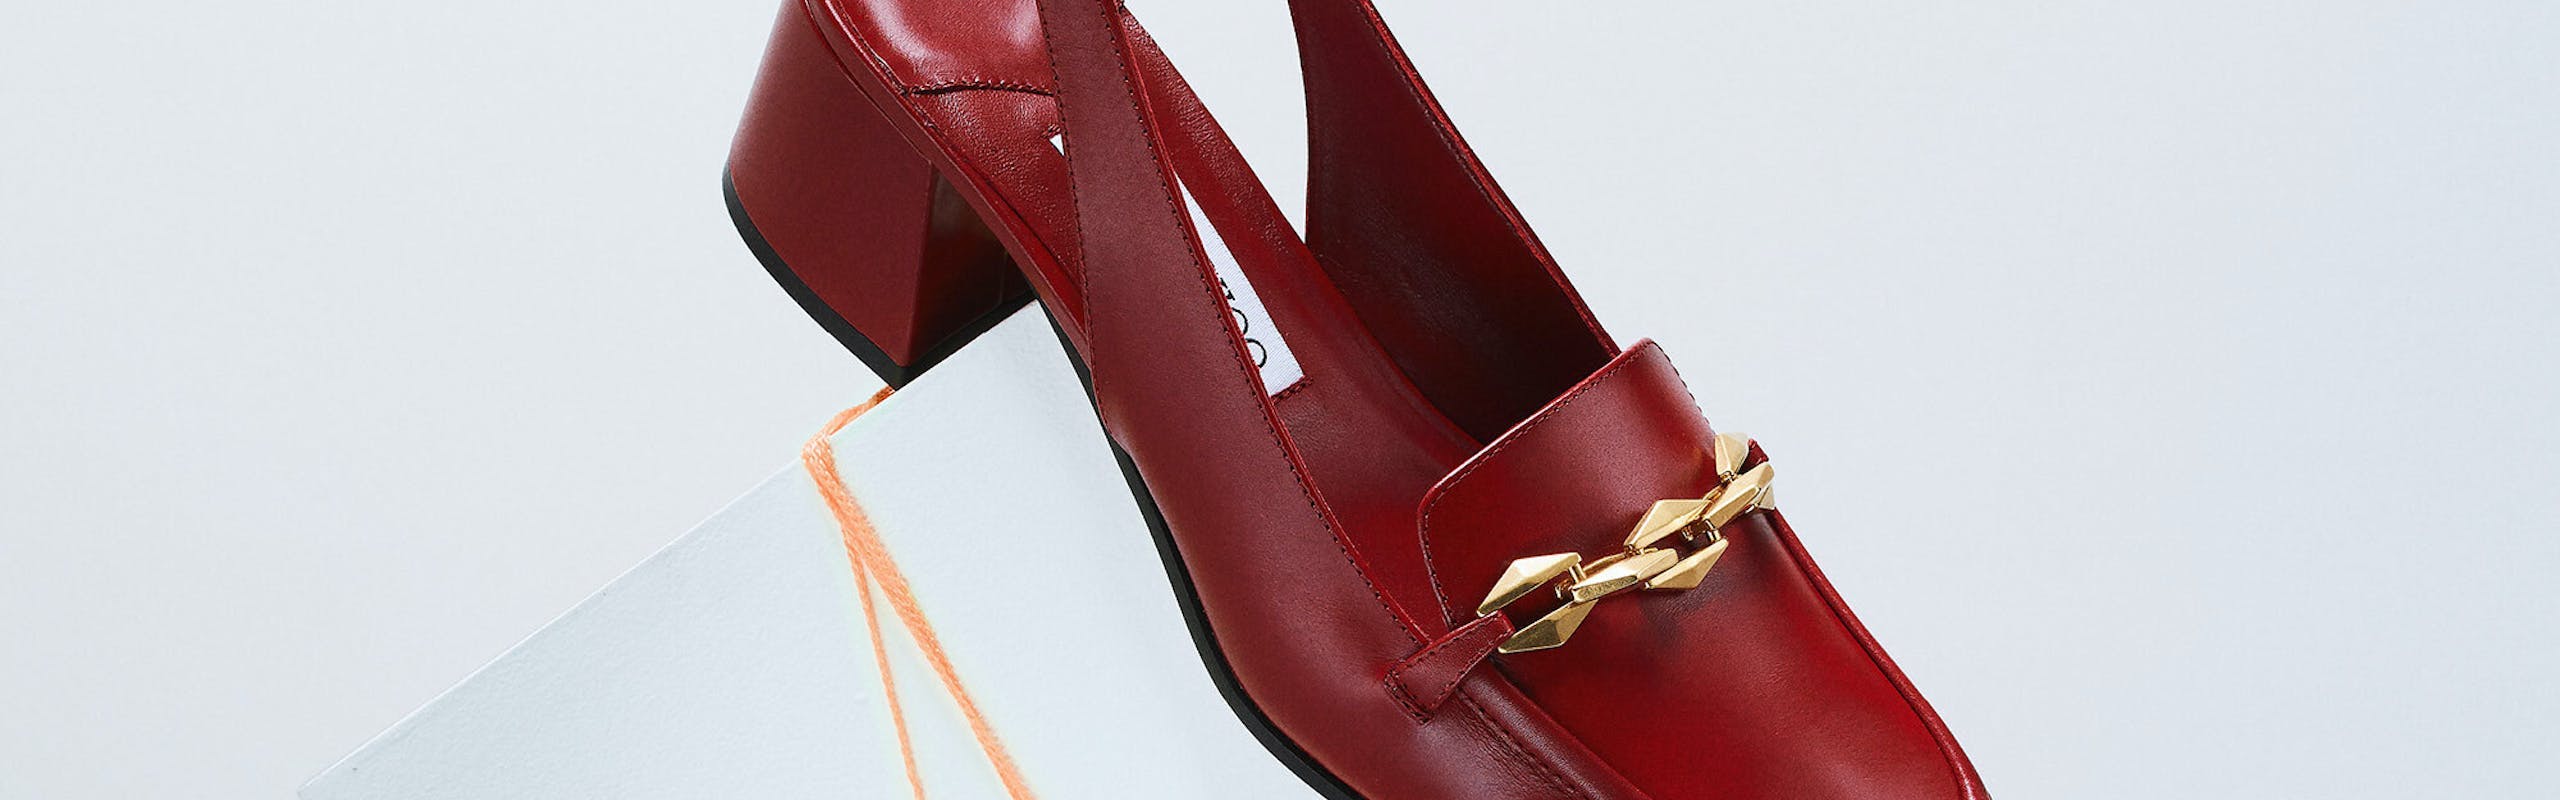 Slingback Loafer in Burgundy and Gold Detail